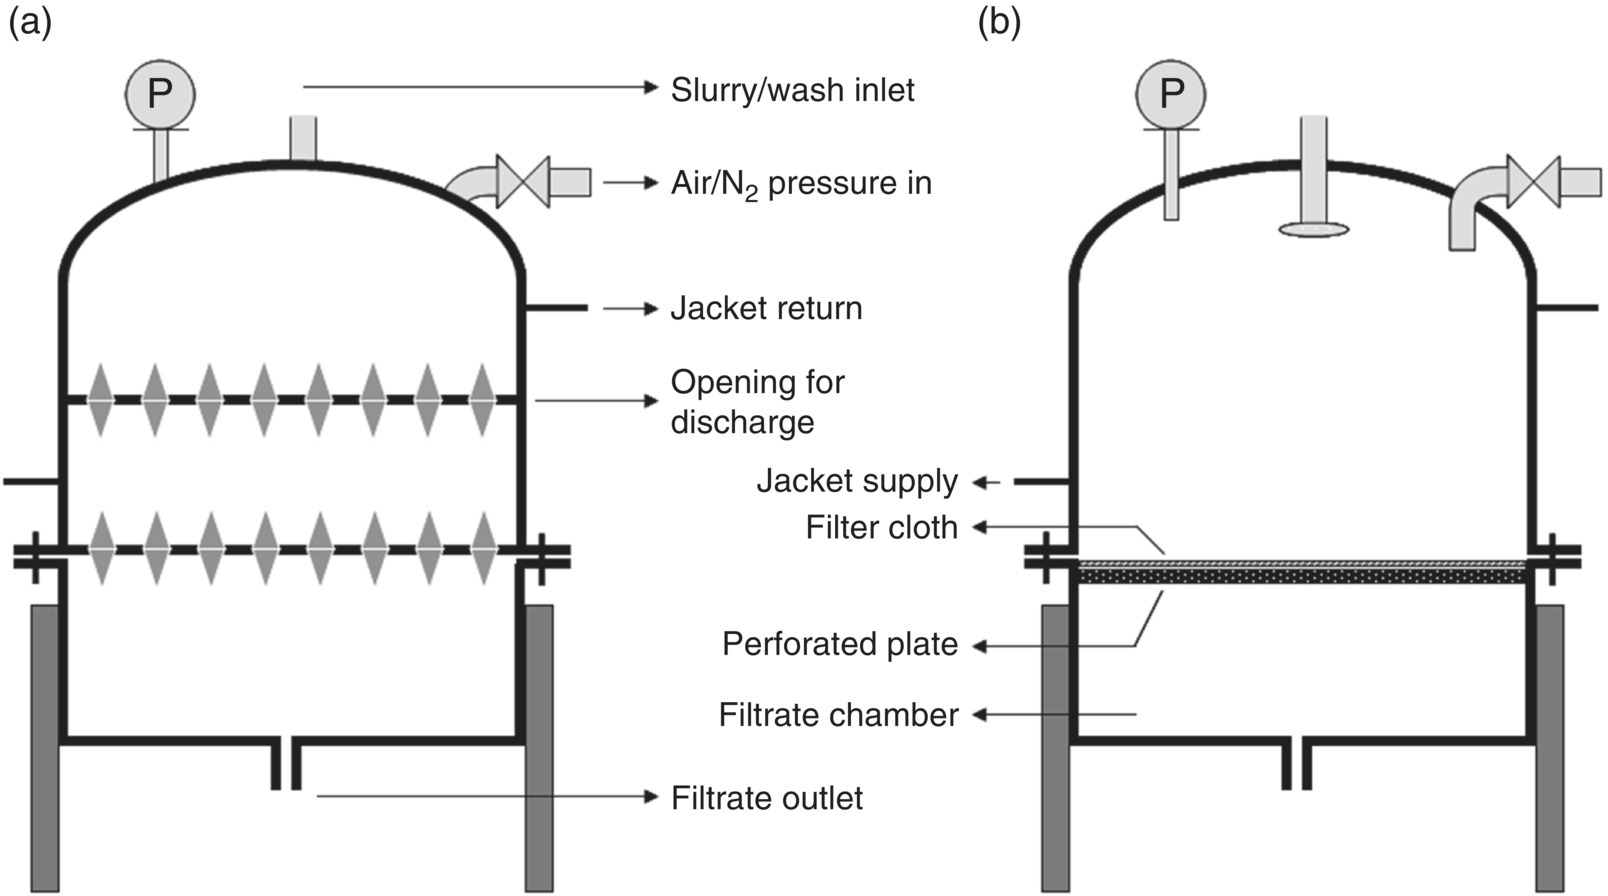 2 Diagram of non-agitated filter dryer in closed position (left) and cross-sectional representation (right) with parts labeled slurry/wash inlet, air/N2 pressure in, jacket return, opening for discharge, etc.